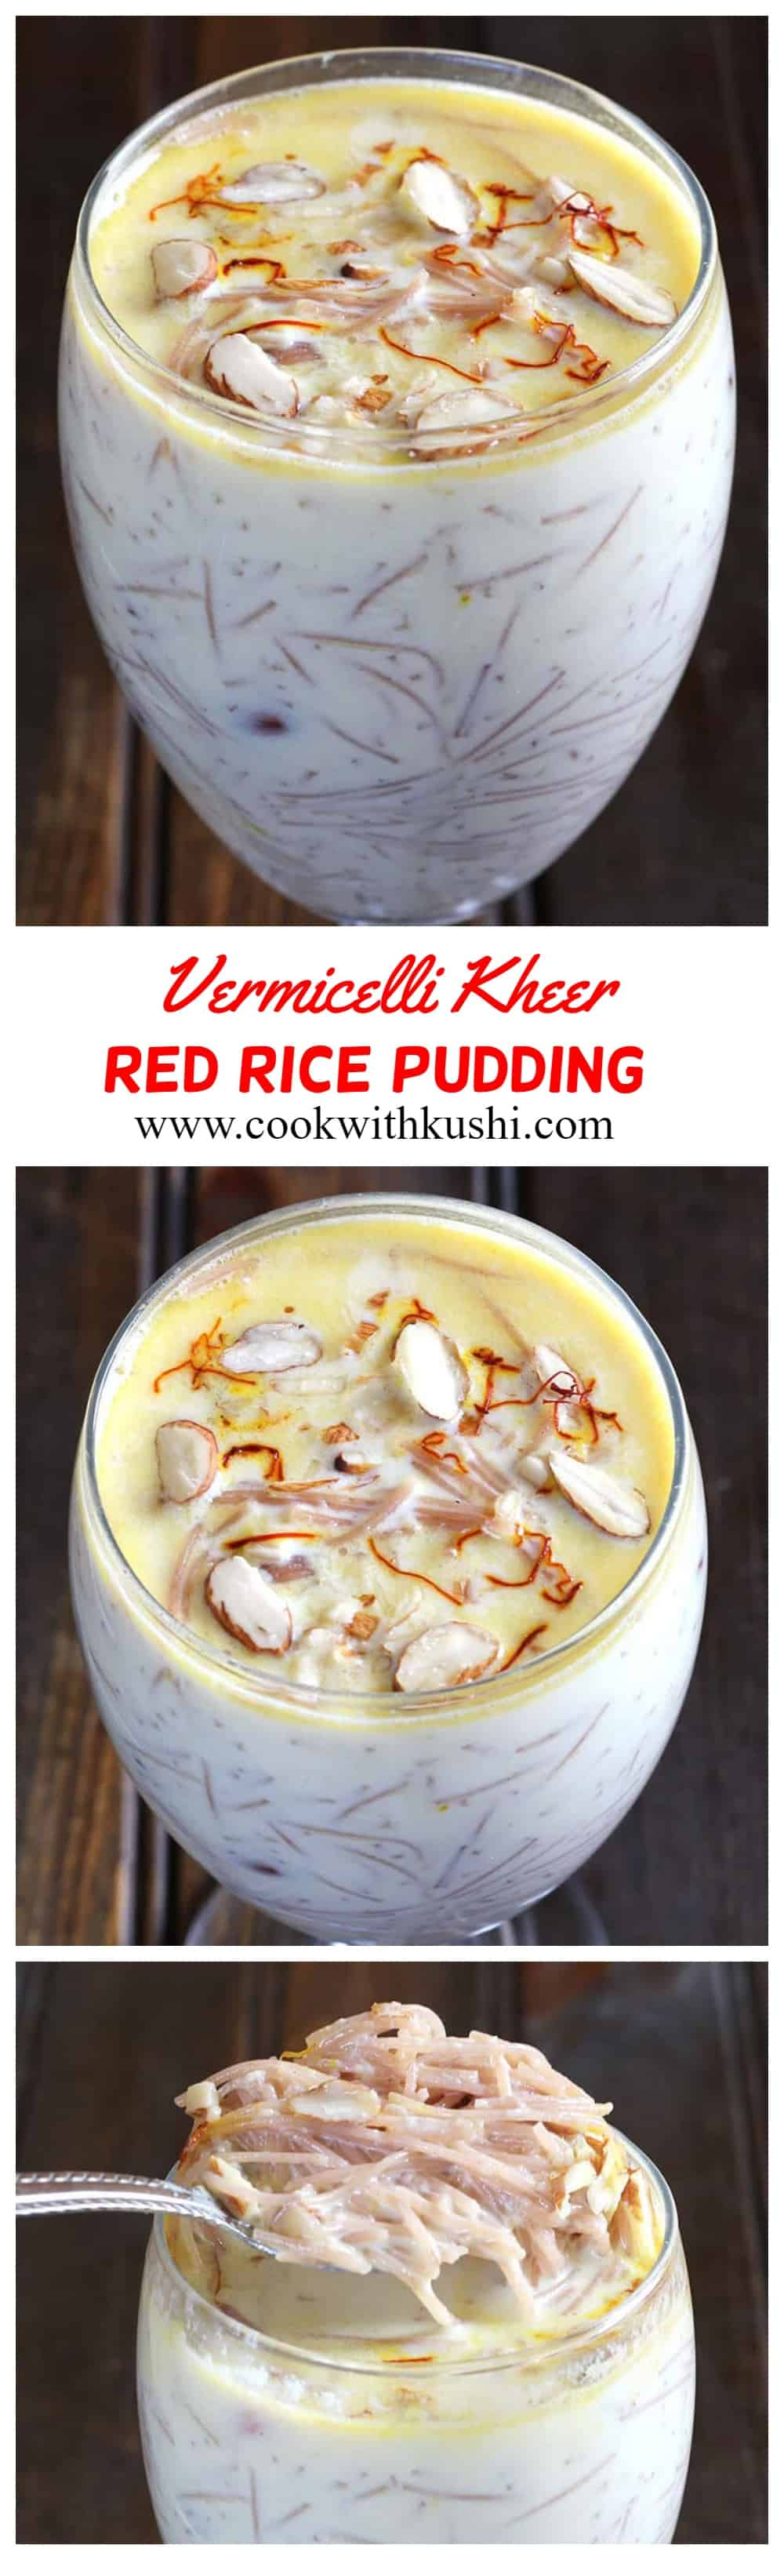 Red Rice Vermicelli Kheer is an easy to make, classic and rich, popular and delicious Indian dessert or sweet prepared in less than 20 minutes. #redrice #vermicelli #kheer #instantpot #ricekheer #instantpotkheer #indiansweets #indiandesserts #payasam #festivalfood